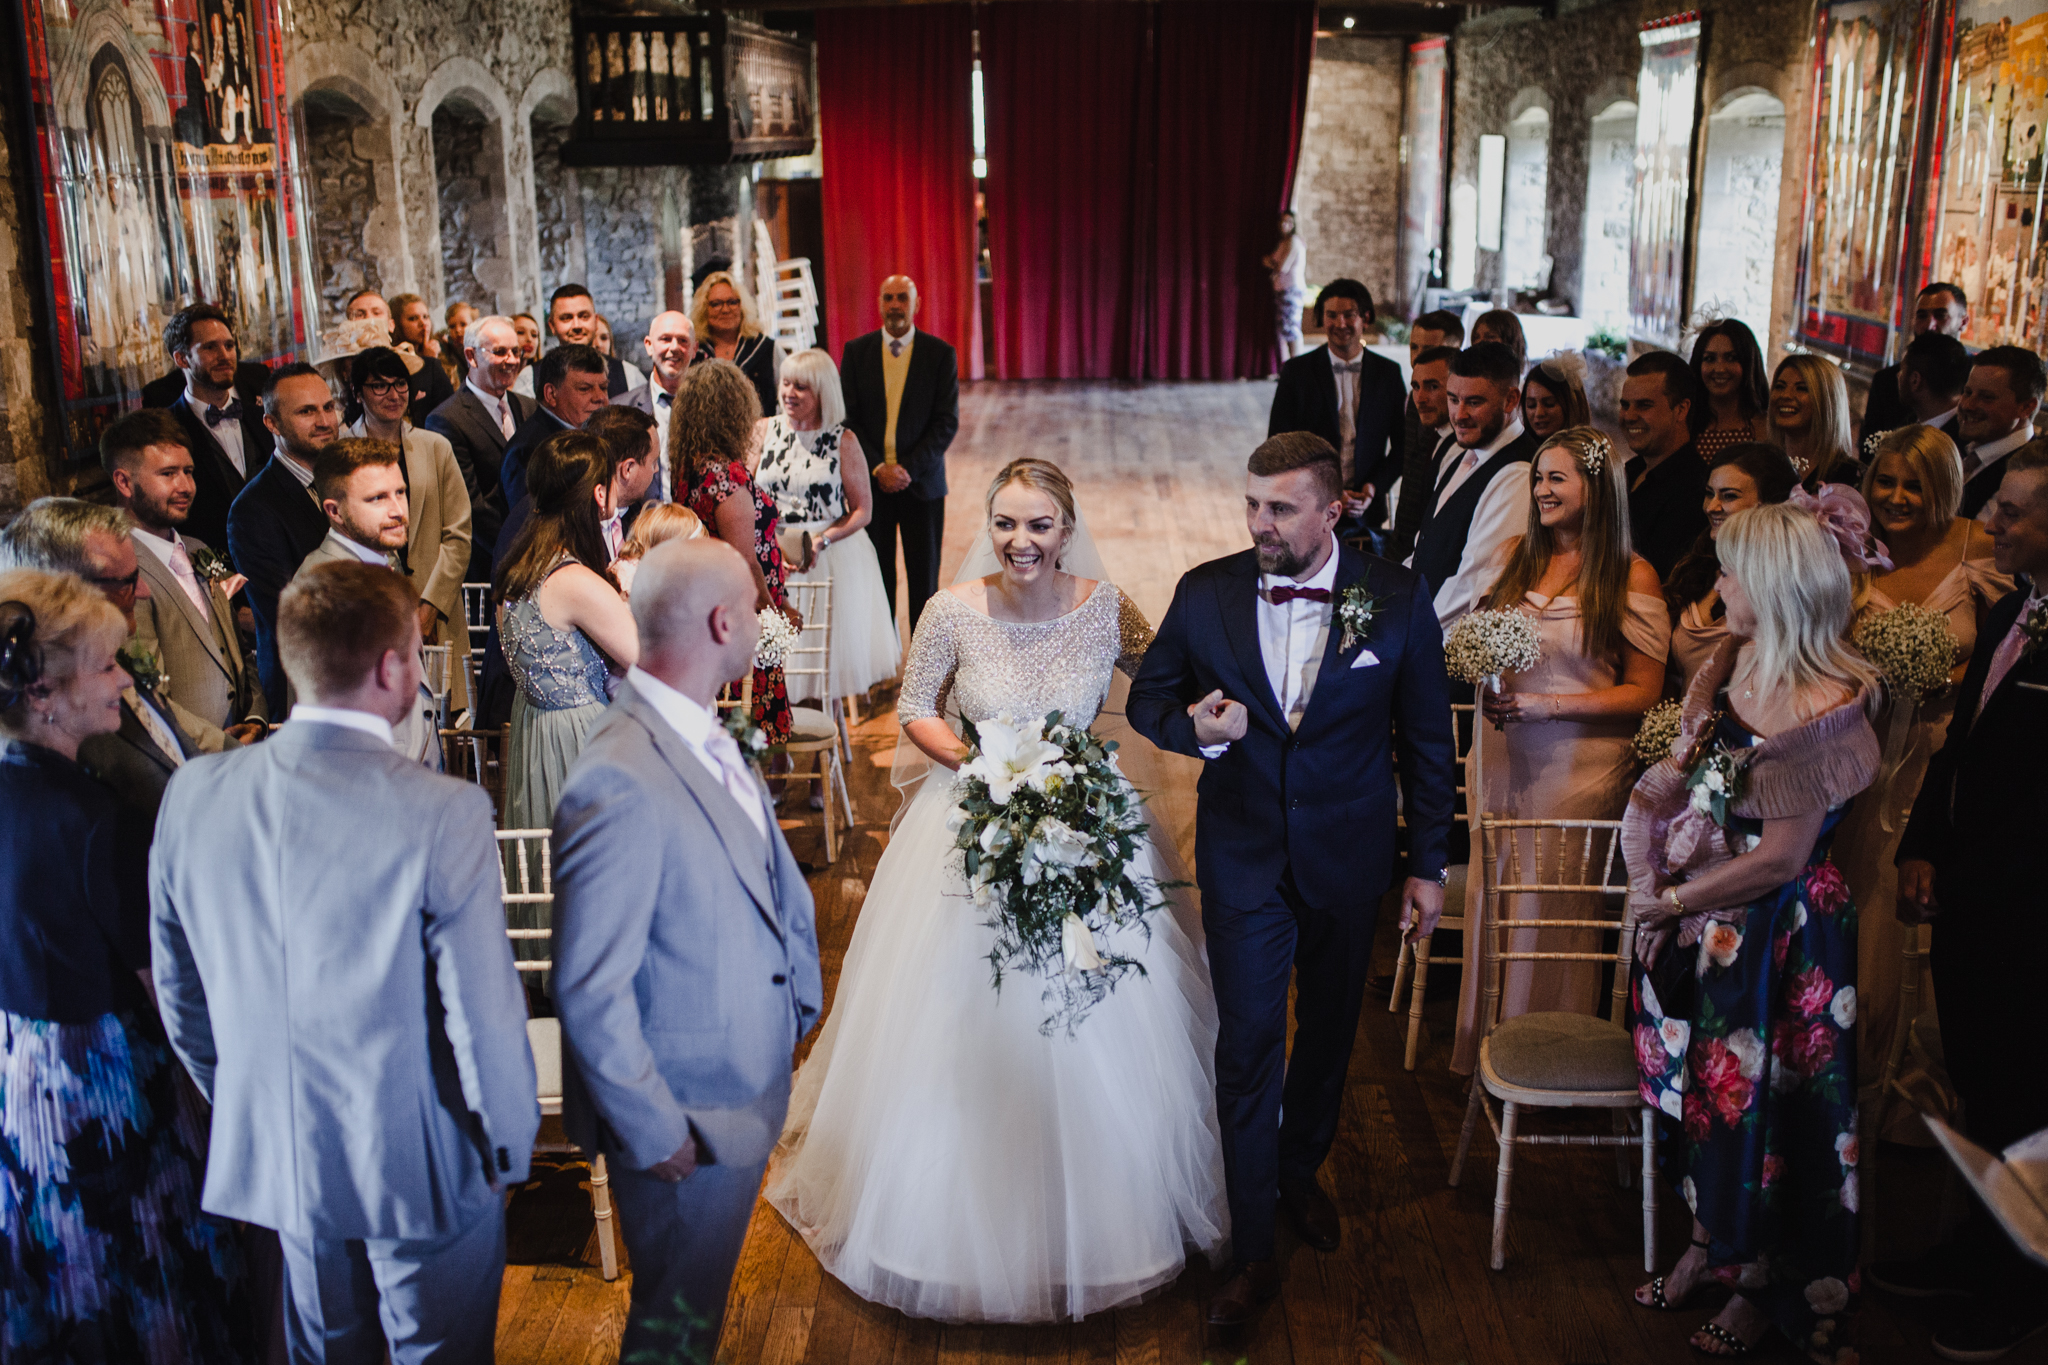 A bride and her father walking down the aisle in a dark castle style venue